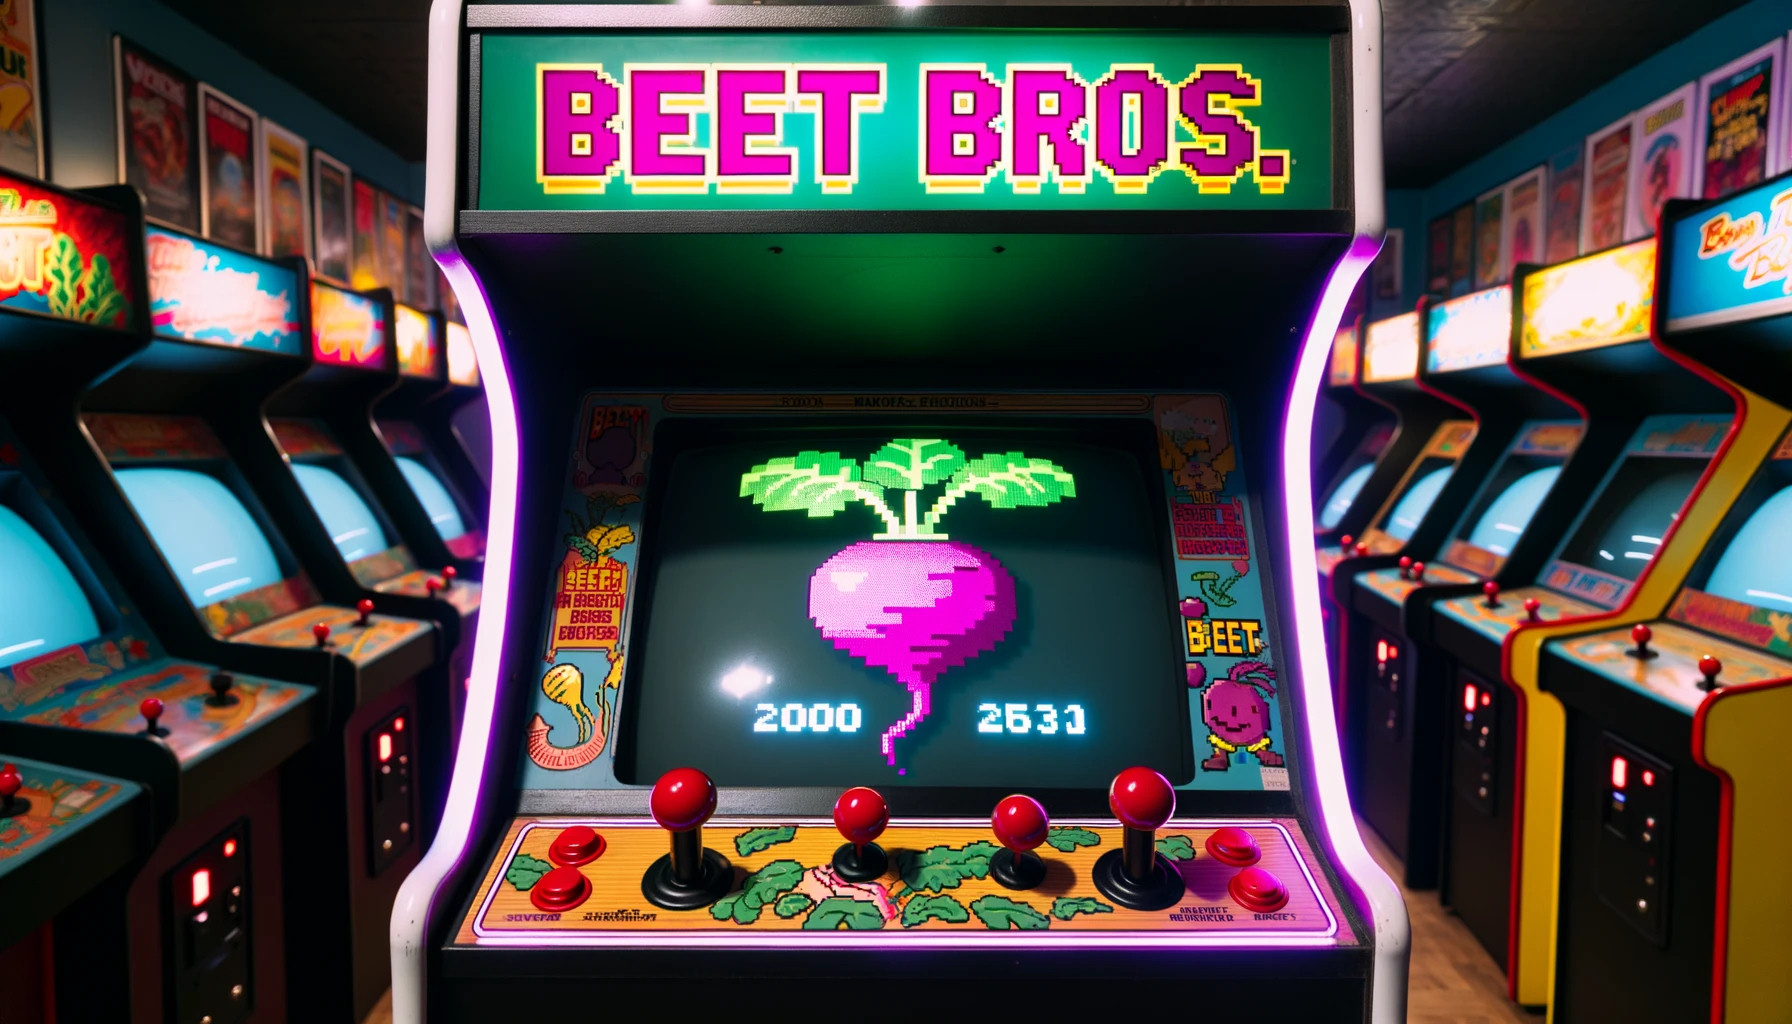 An AI-generated image of a fictional Beet Bros. arcade game, created by DALL-E 3.